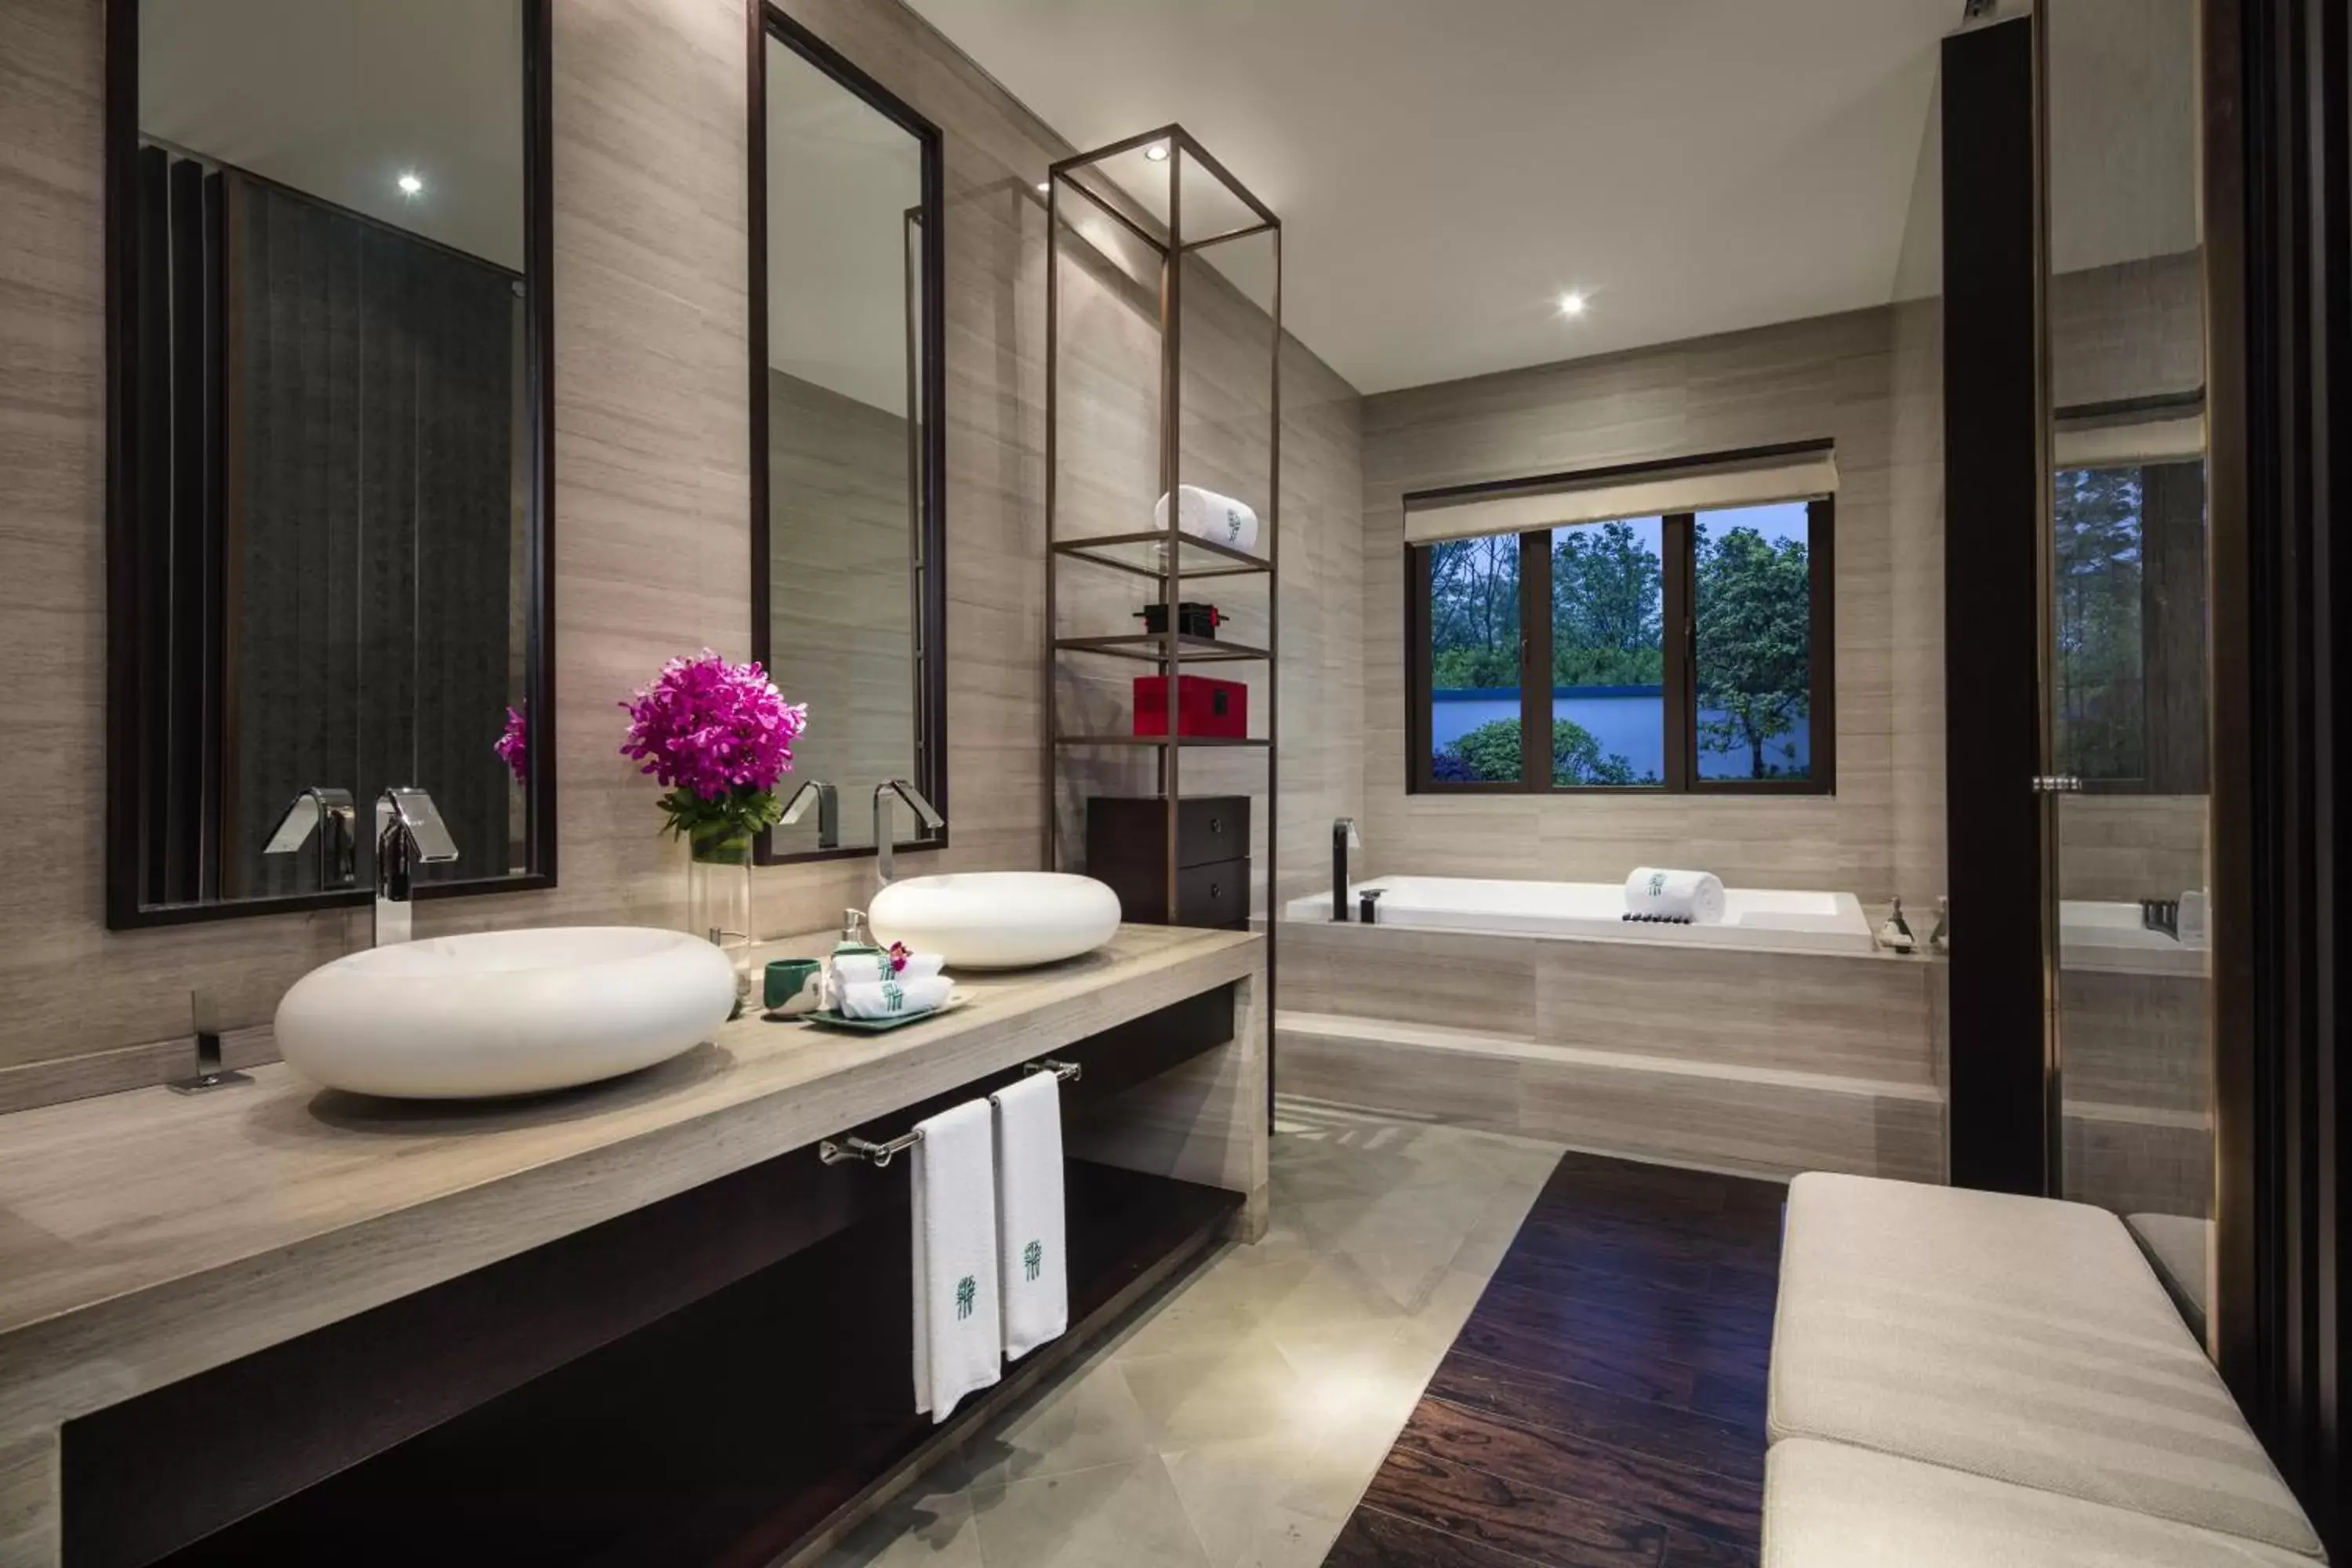 Bathroom in Banyan Tree Hotel Huangshan-The Ancient Charm of Huizhou, a Paradise